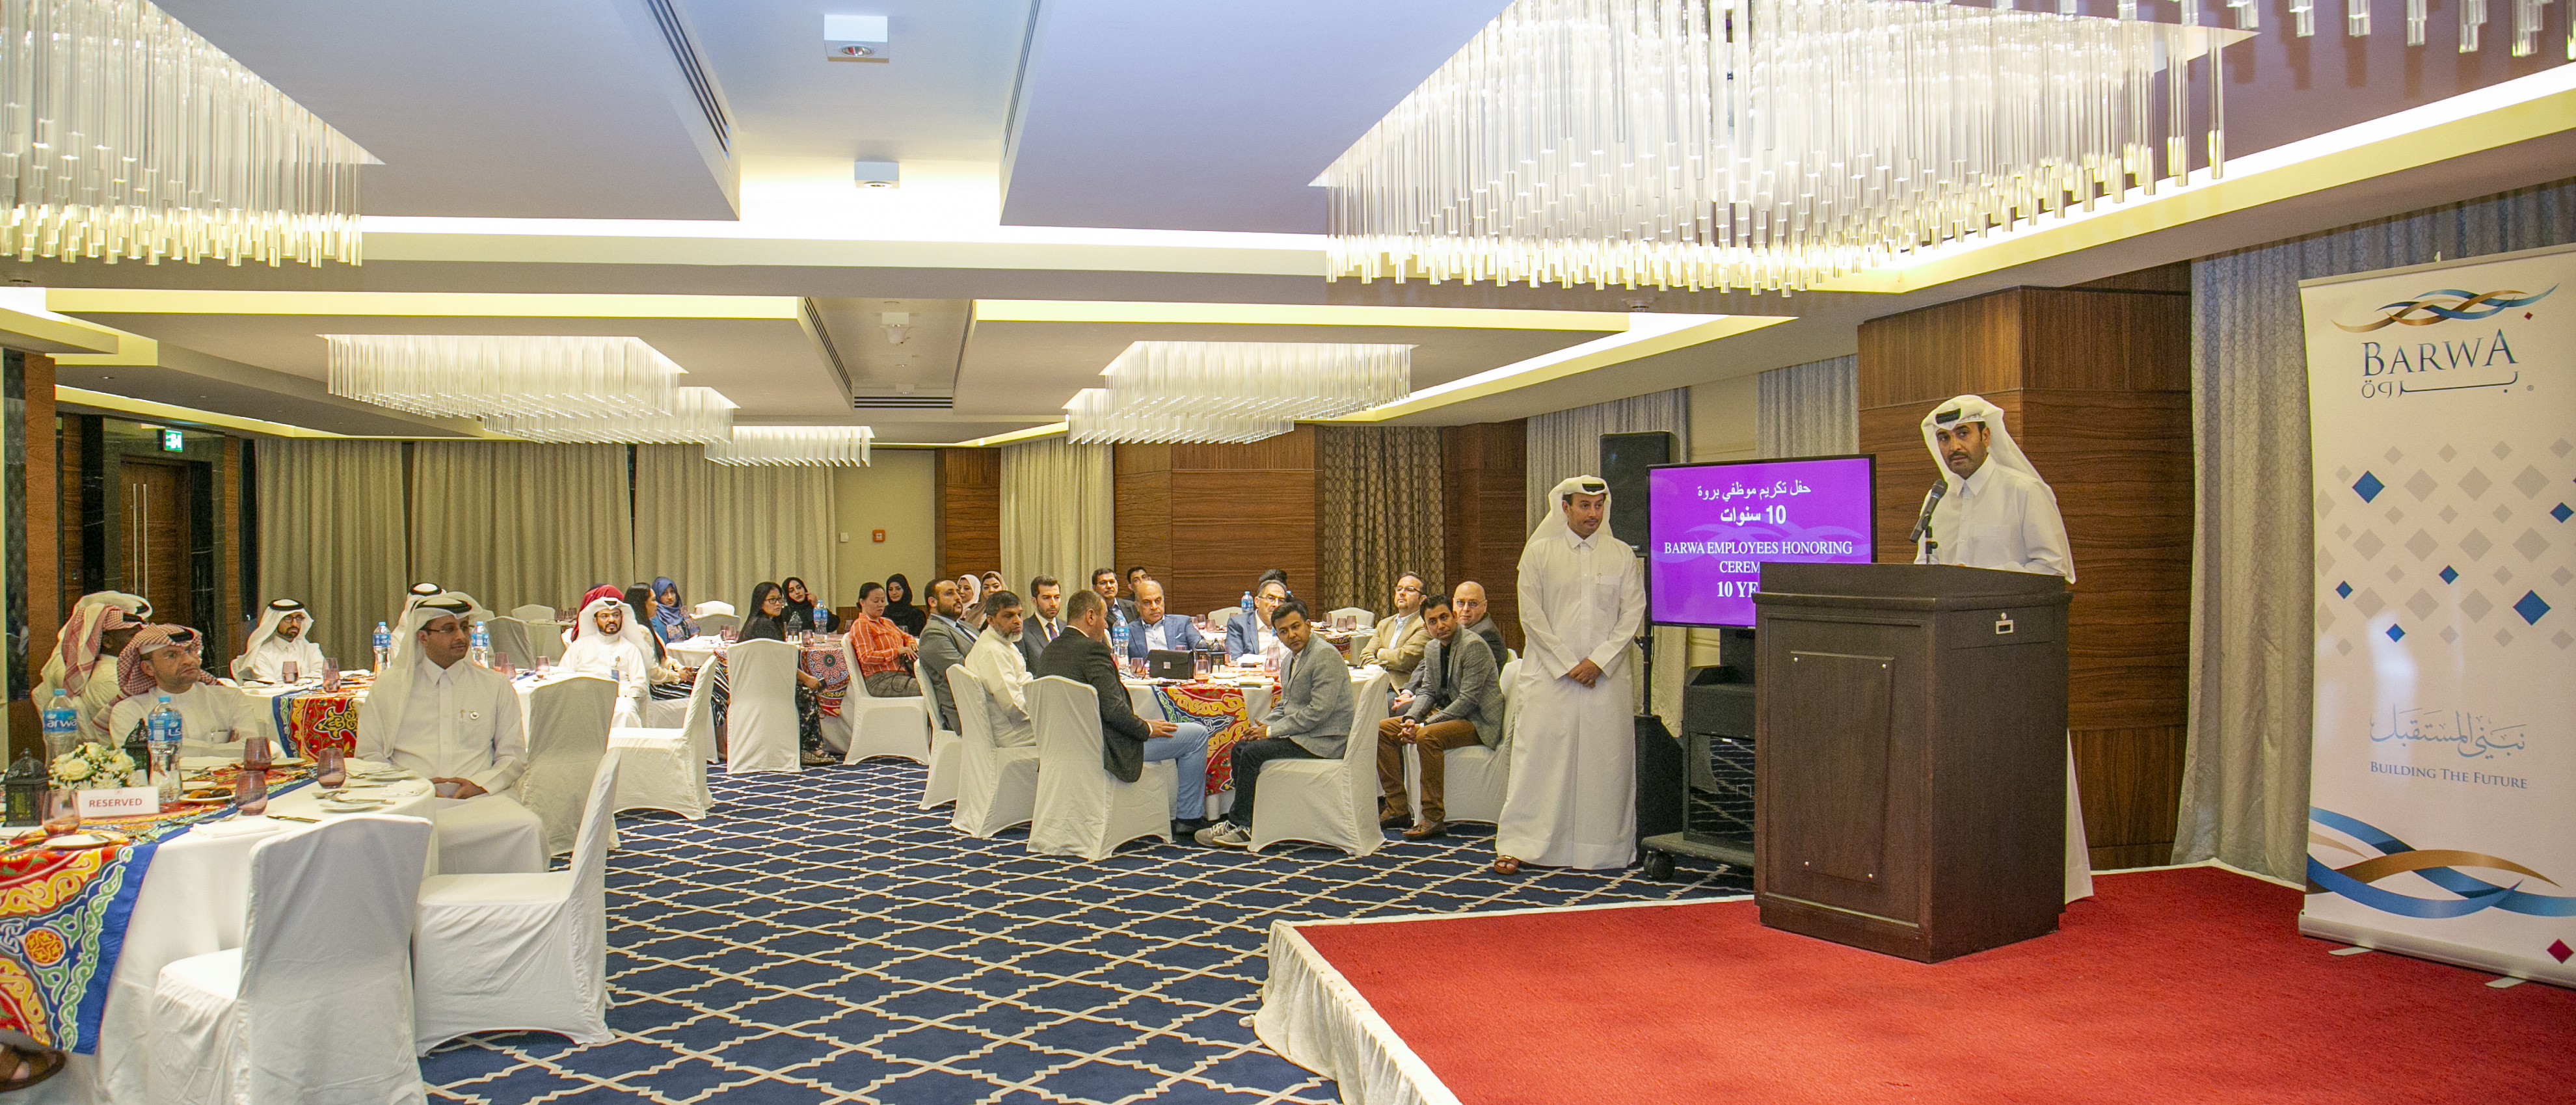 Barwa Real Estate holds gala dinner ((Gabga)) and honors its employees